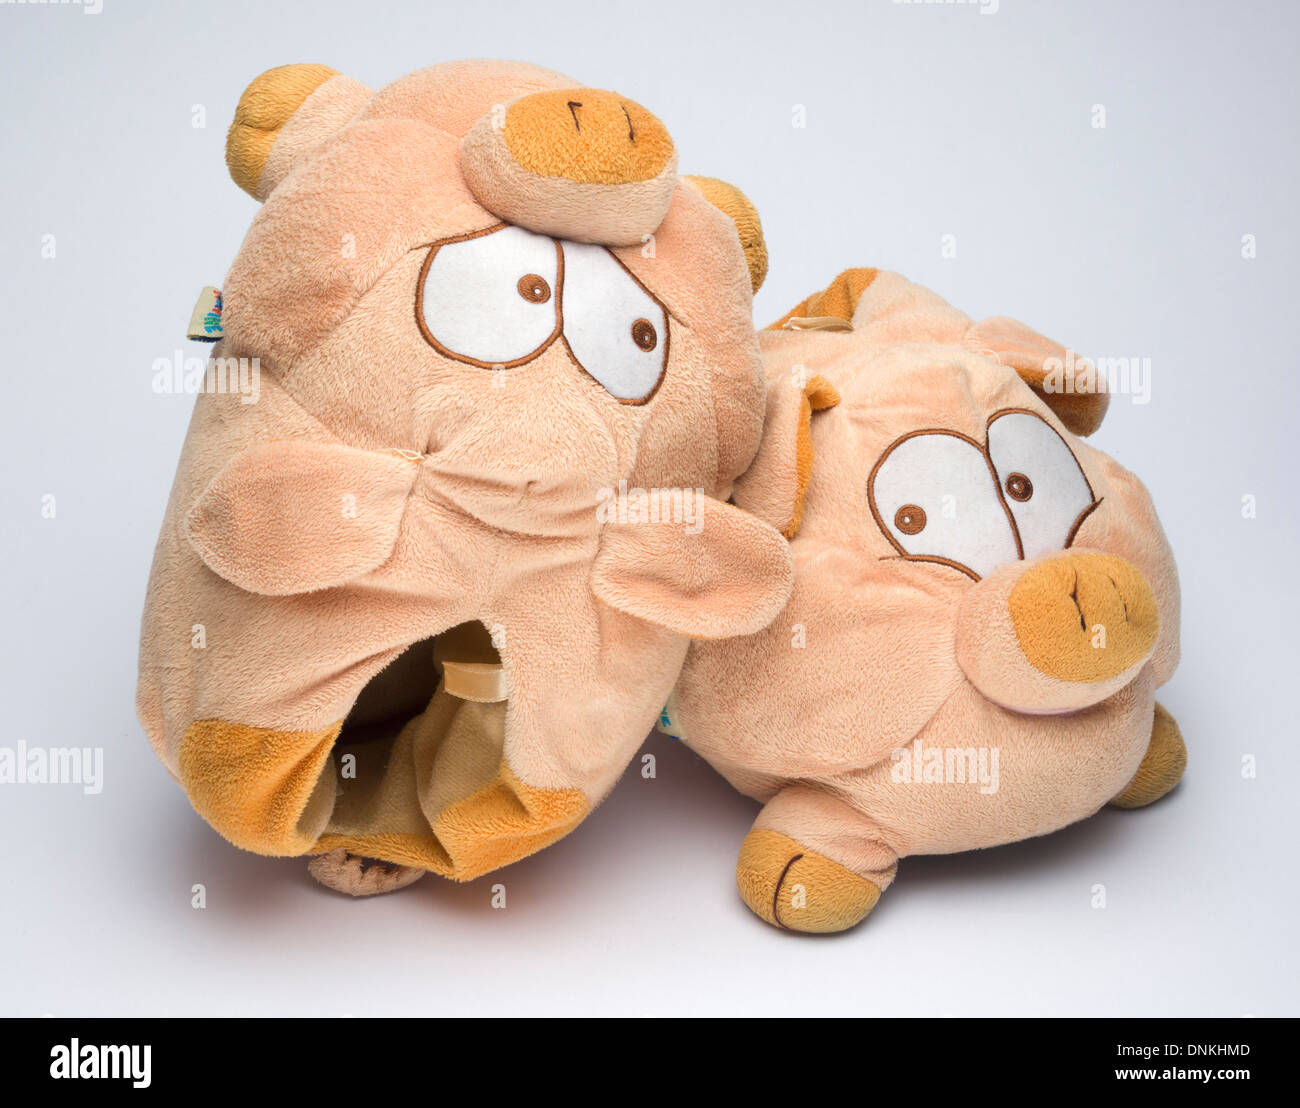 Novelty High Resolution Stock Photography and - Alamy